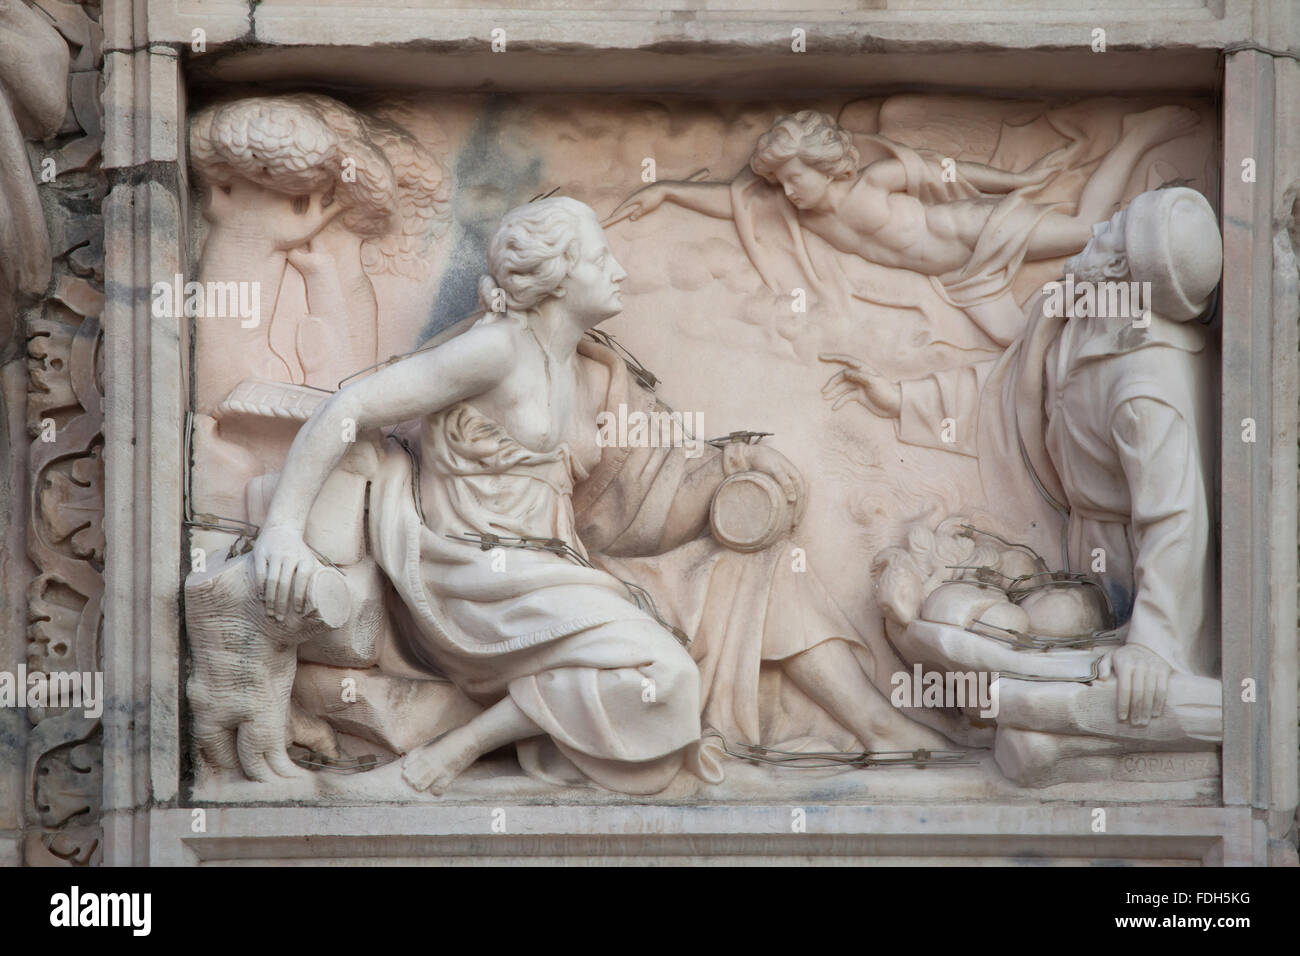 Biblical scene depicted in the marble relief on the main facade of the Milan Cathedral (Duomo di Milano) in Milan, Lombardy, Ita Stock Photo